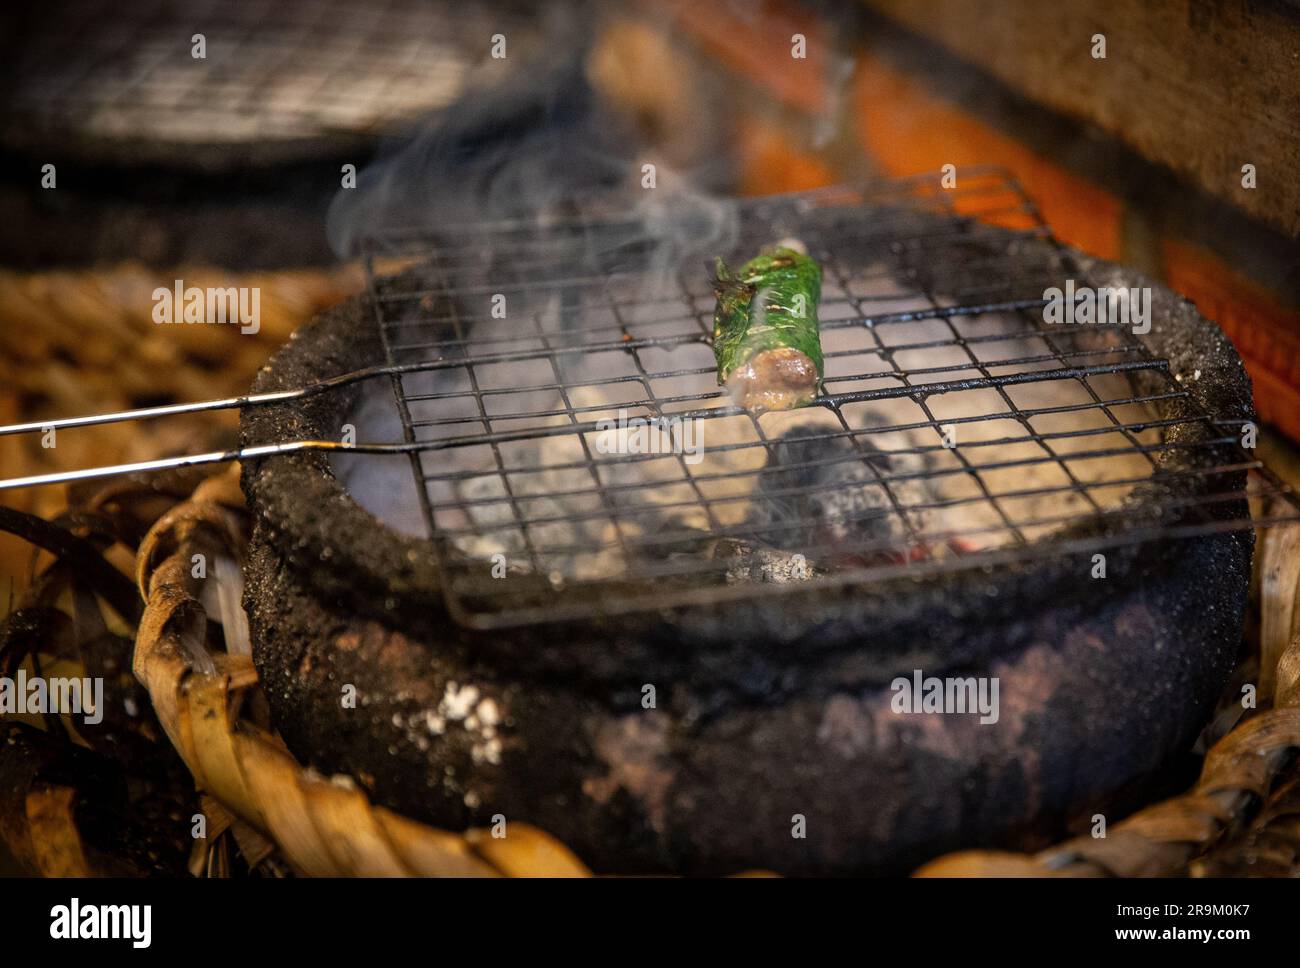 Grilling seafood in Asia over coals for an appetizer Stock Photo